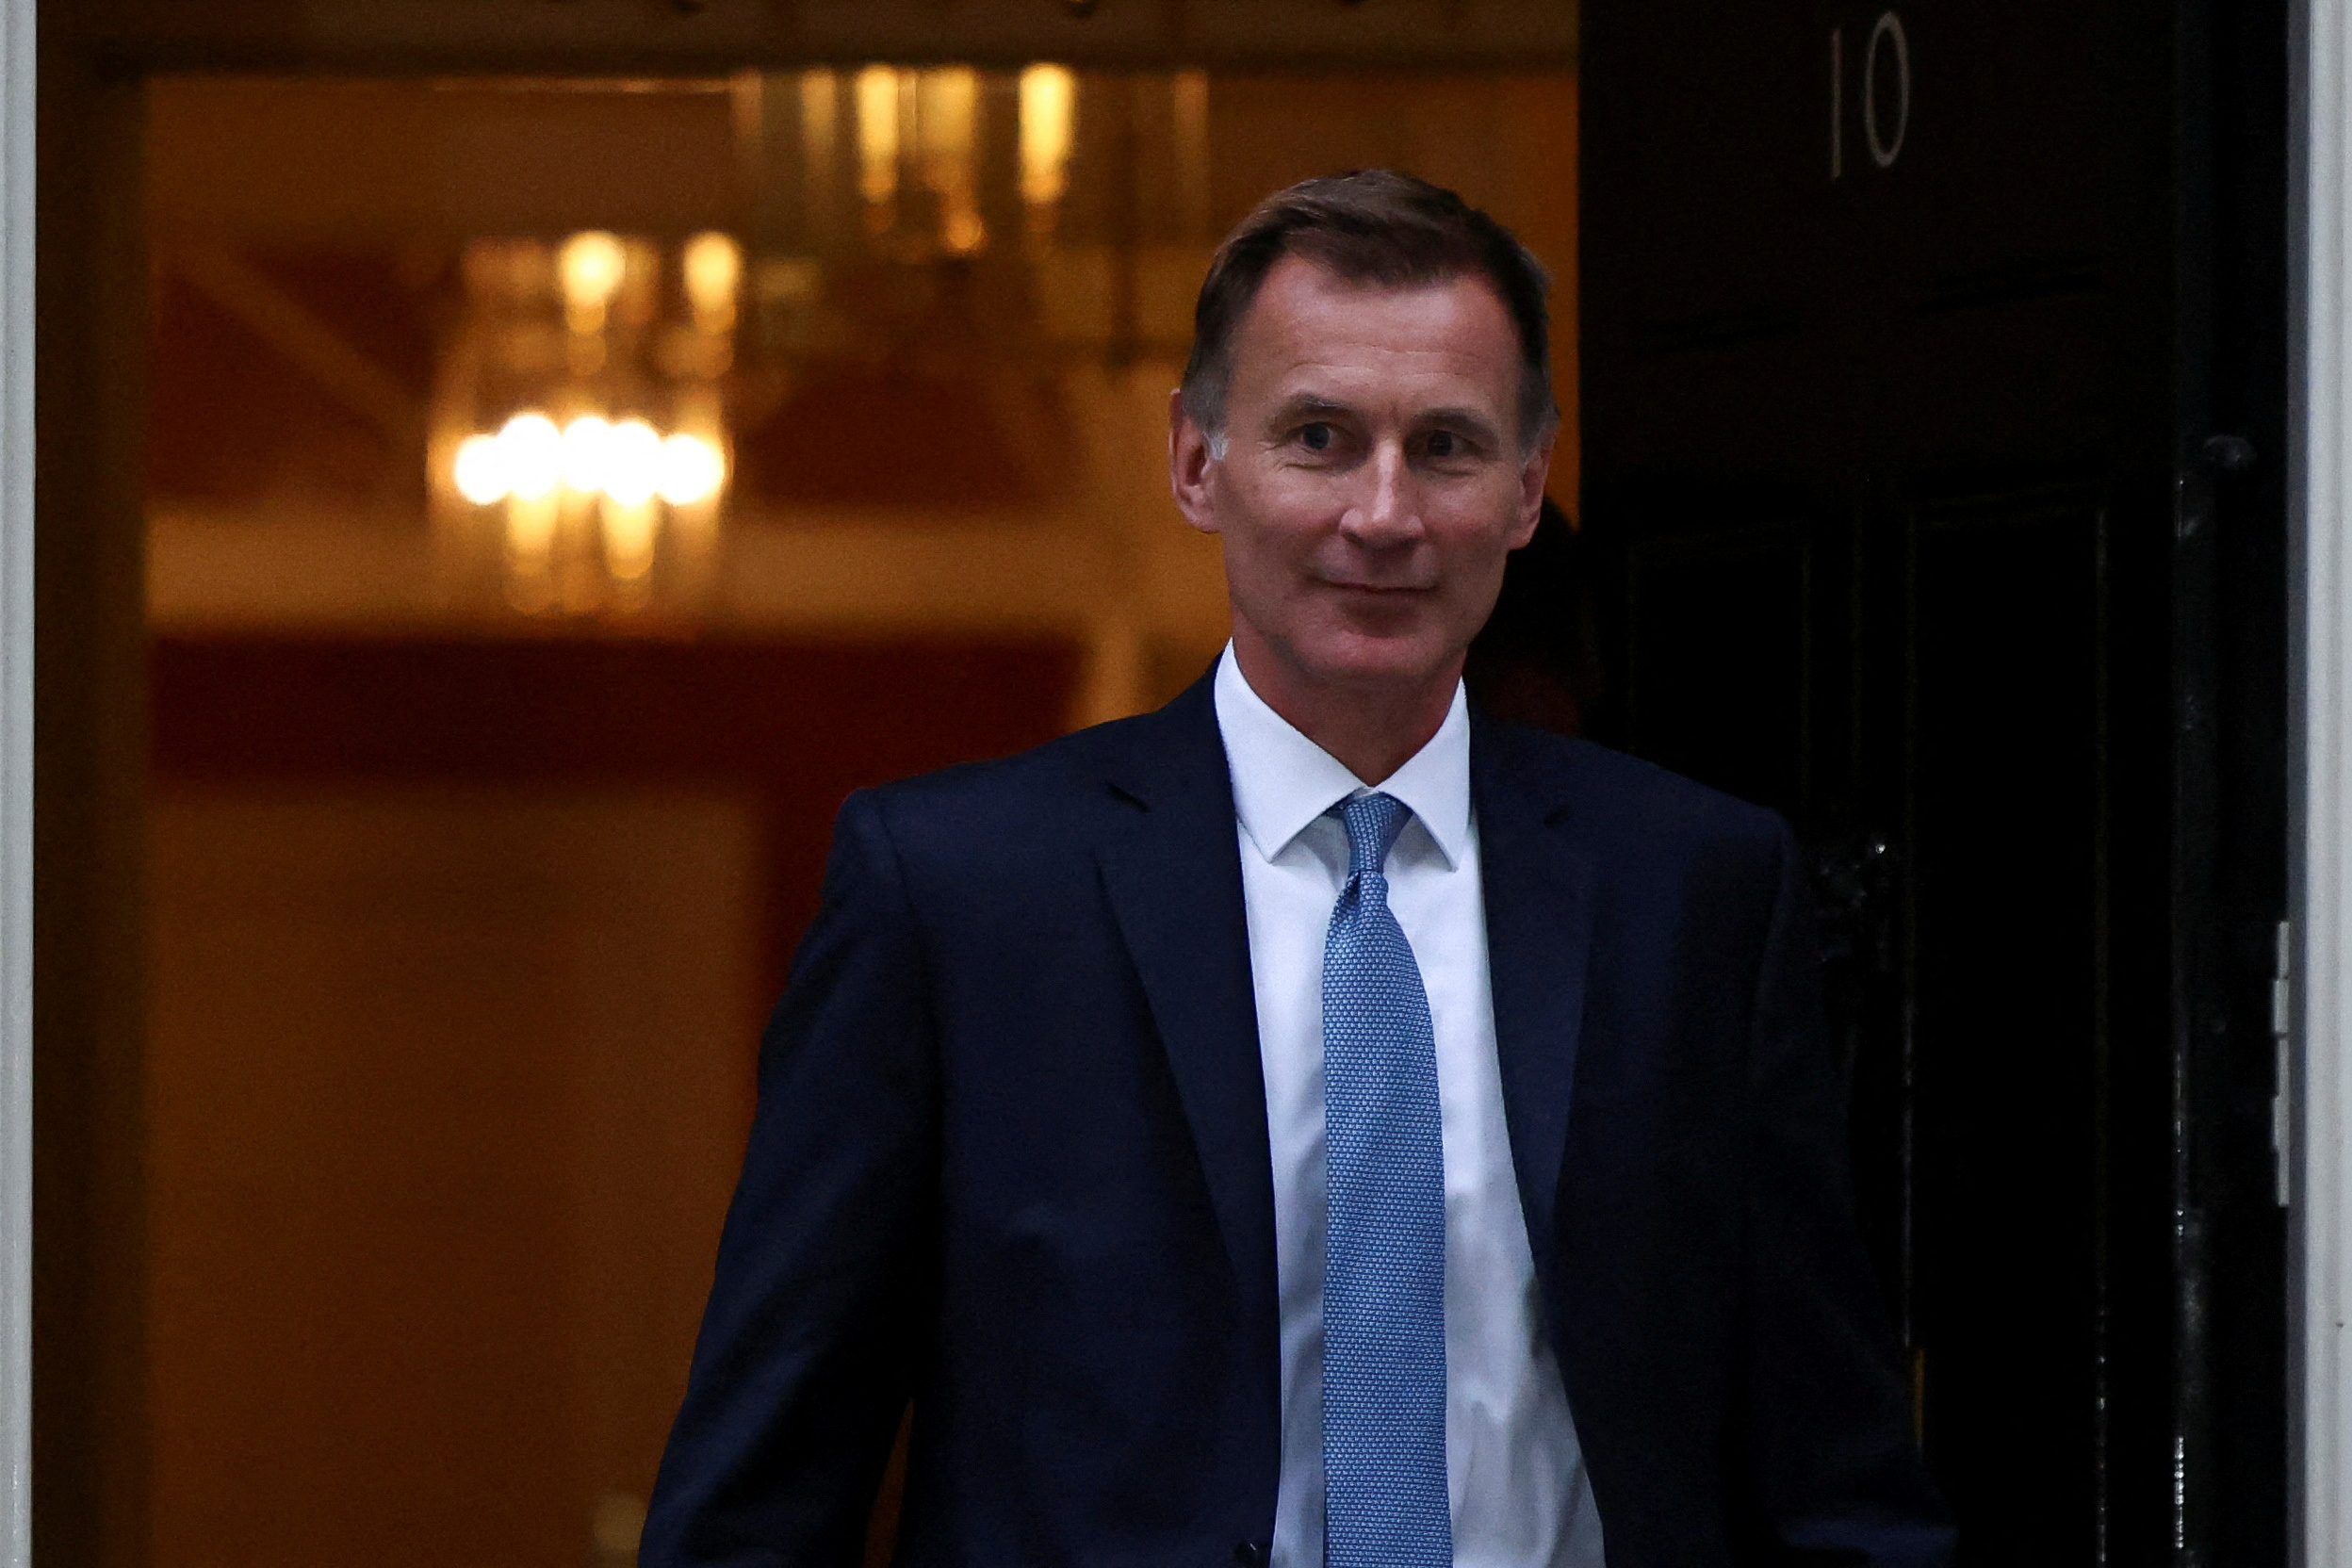 New Chancellor of the Exchequer Jeremy Hunt leaves 10 Downing Street in London